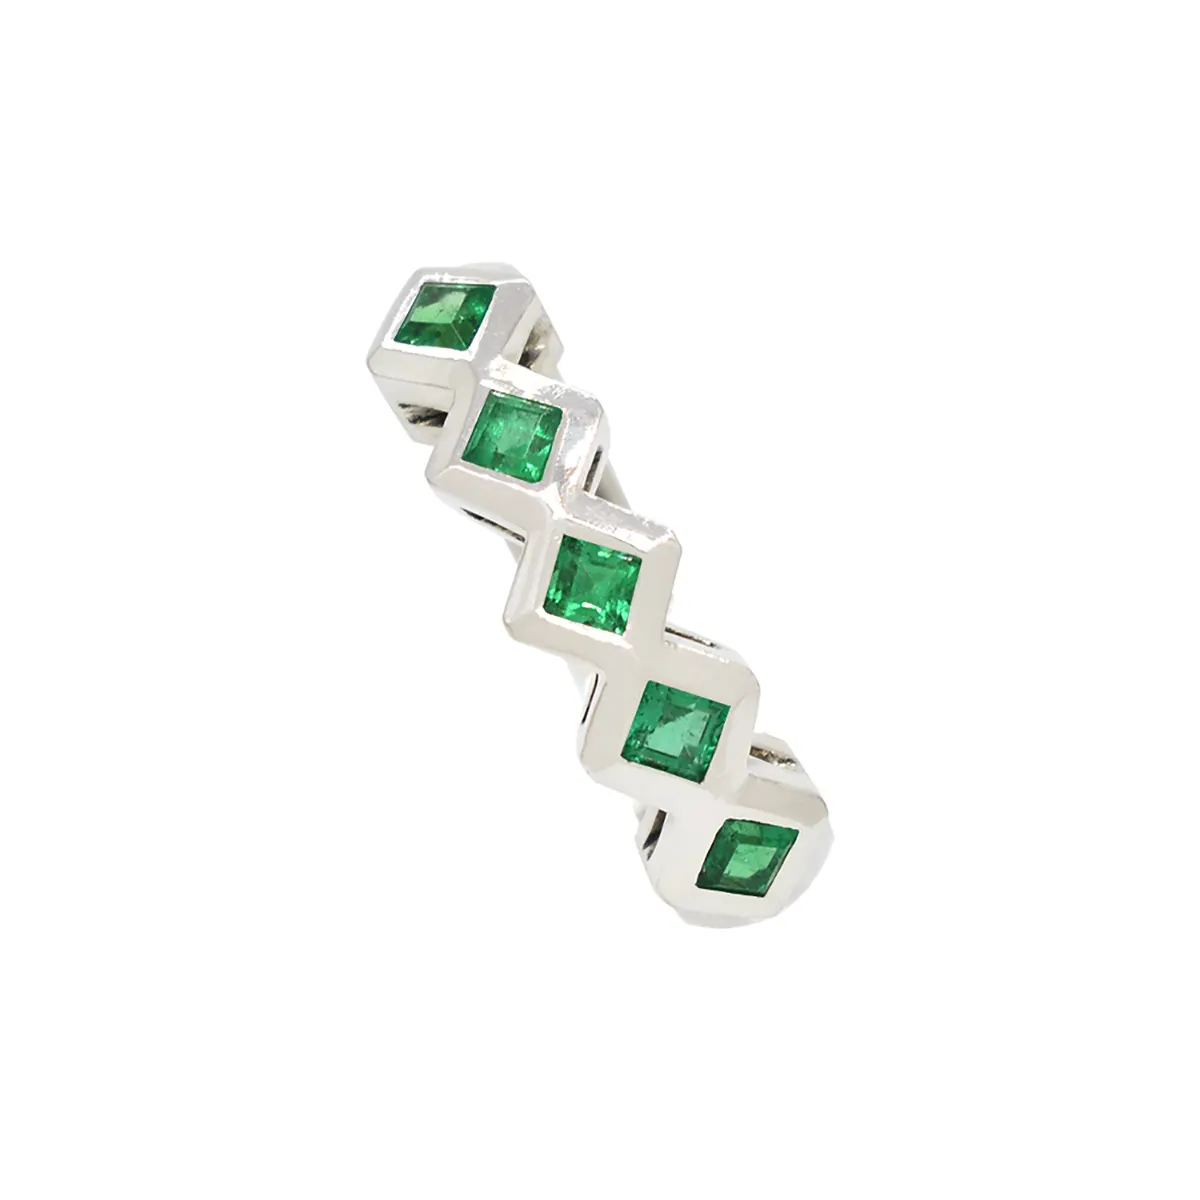 The 5 square cut emeralds cover the center part of the ring. They are set in rhombus shapes and connected in their corners